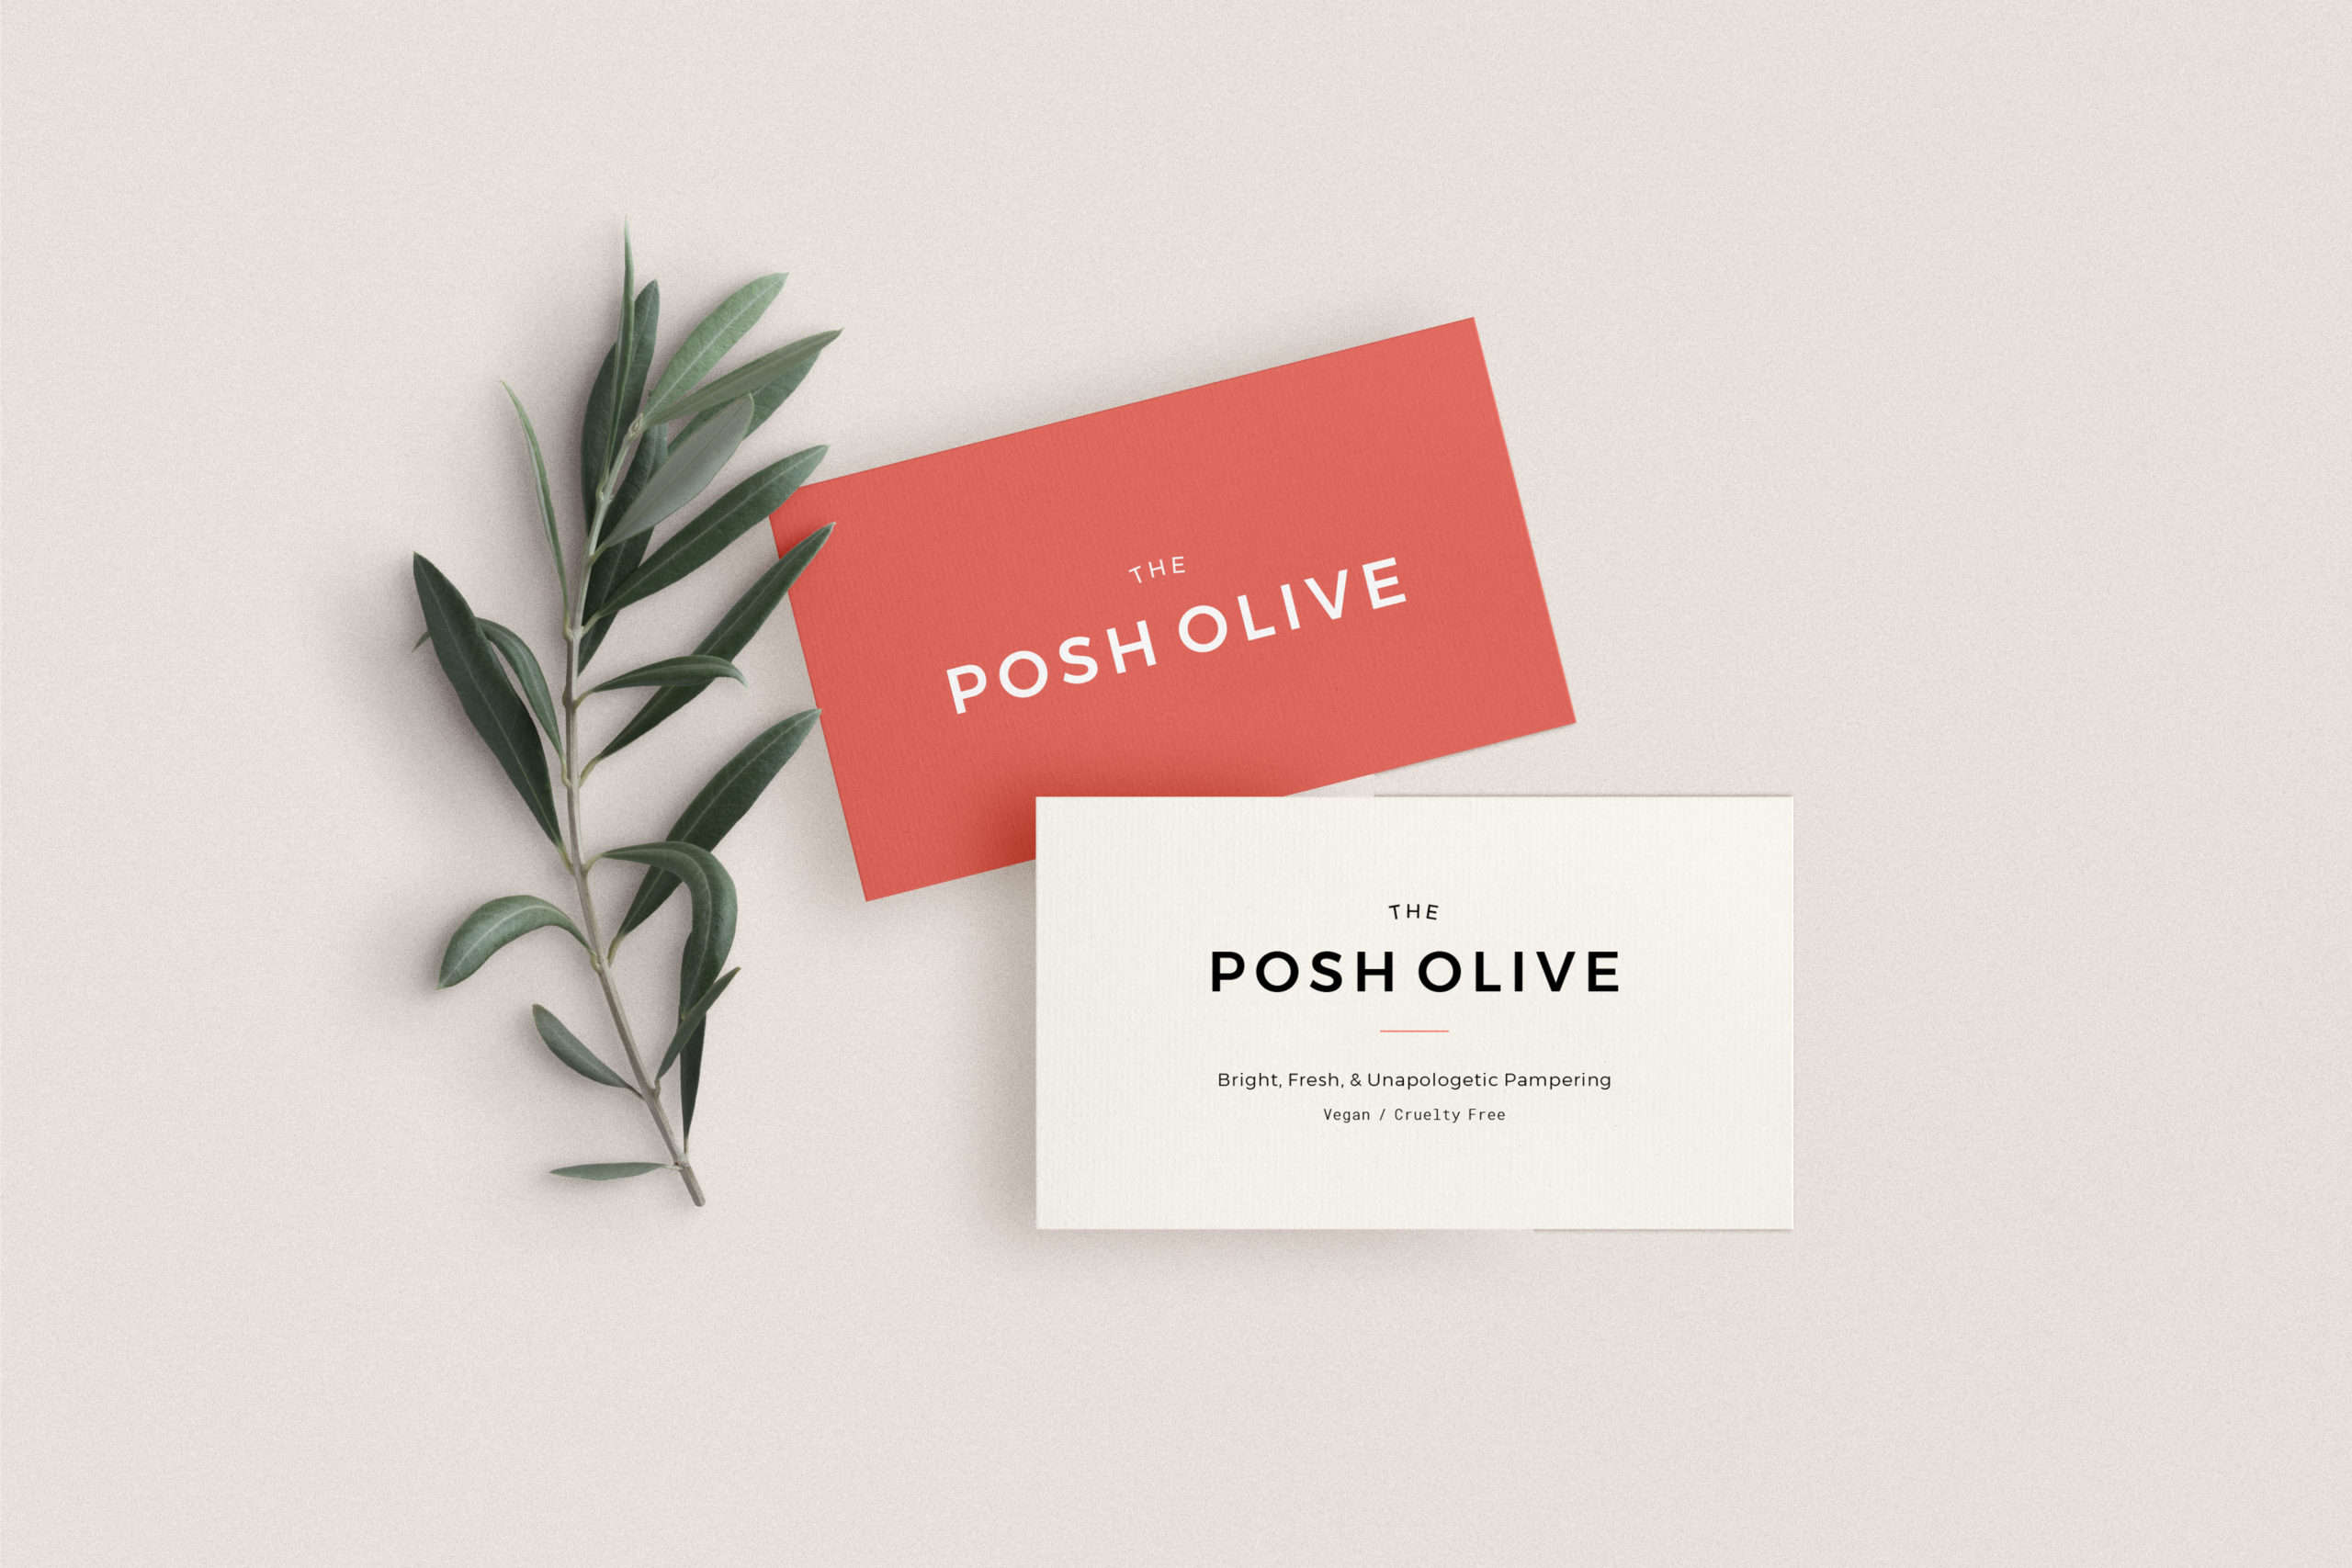 The Posh Olive | Soaps and Bath Products // Brand Design by Sarah Ann Design